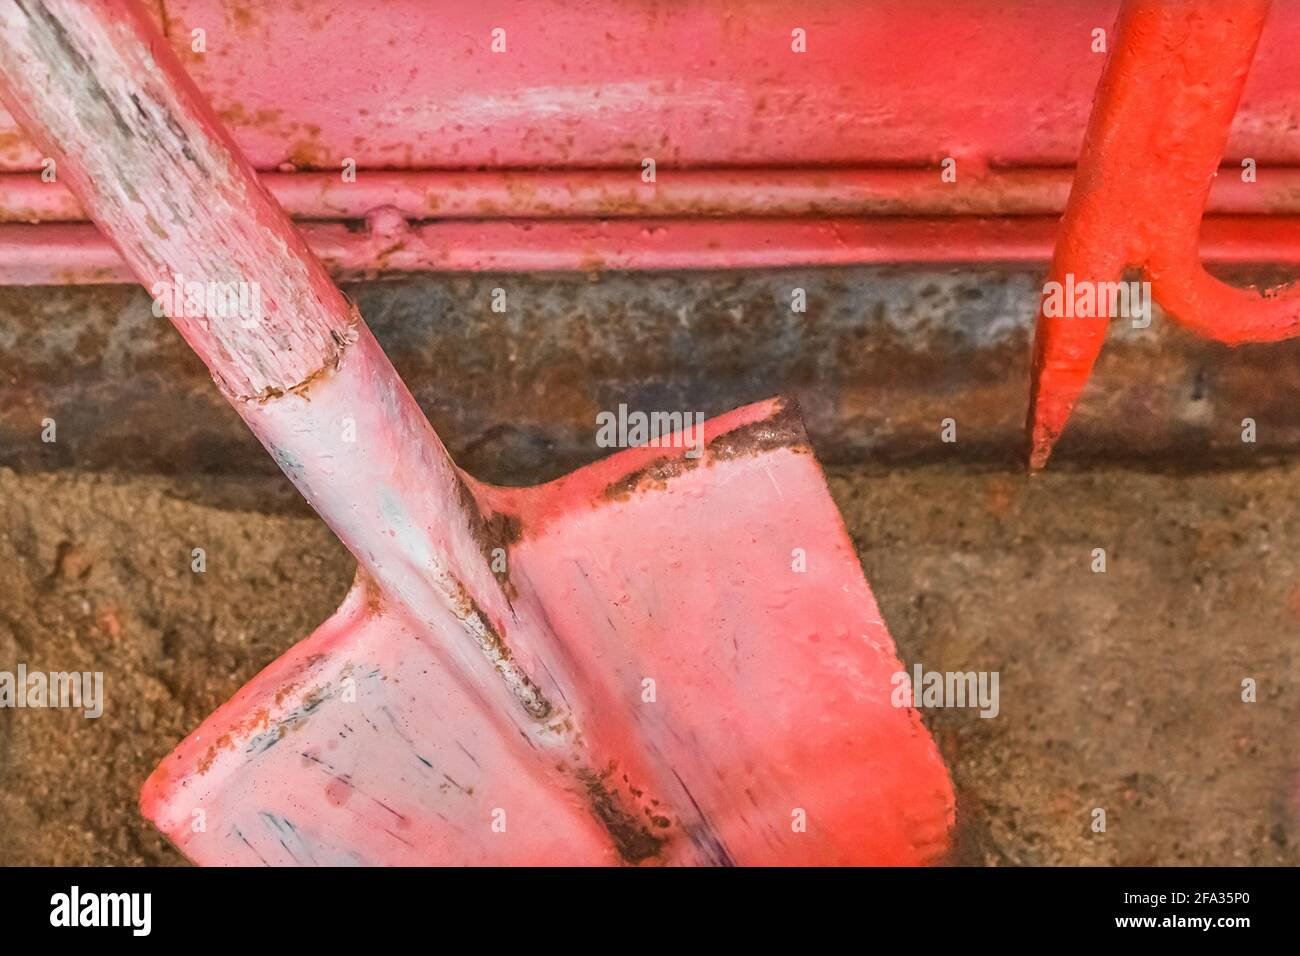 Old fire red box with a shovel and hook and tools to help during a dangerous situation. Stock Photo